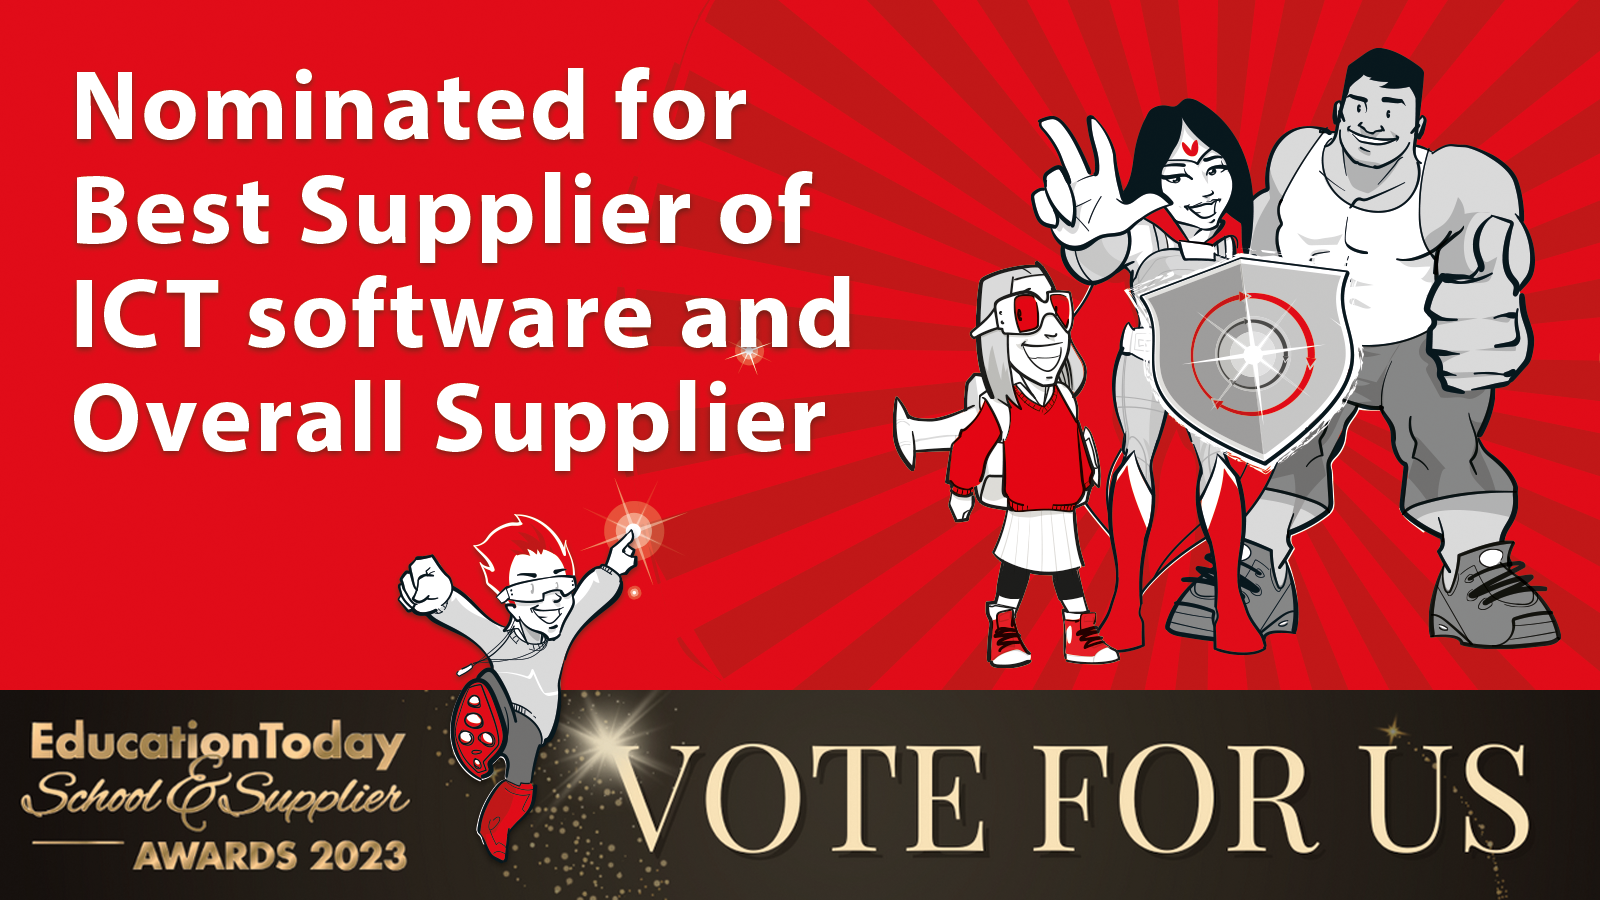 Nominated for Best Supplier of ICT software and Overall Supplier